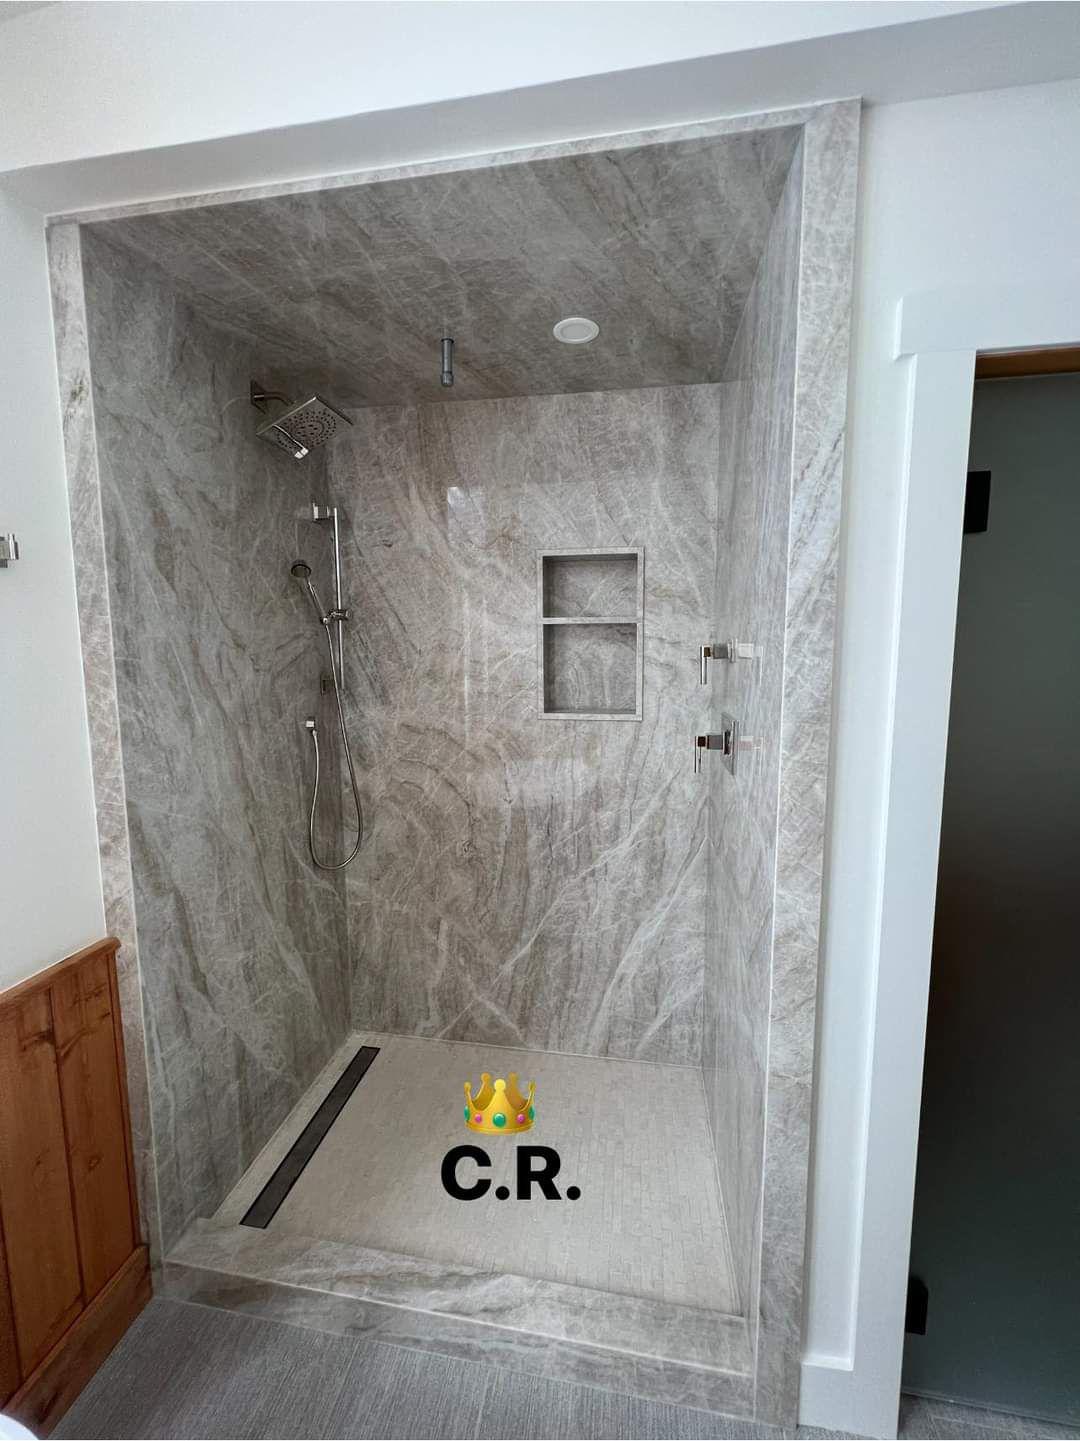 We are your top-rated Slab Yard & Countertop Store in Teton ID. Call us today for a FREE estimate on ANY slab purchase or countertop! 
Visit us at https://www.royaltystoneid.com. 
Our services include: Slab Yard, Granite Stones, Marble Stones, Quartz Stones, Granite, and Countertops. 
Teton ID slab yard, slab yard Teton ID, Teton ID marble slab yard, Teton ID granite slab yard, Countertops, Marble Countertops, Teton ID tile slab yard, slab yard near me, tile online slab yard Teton ID, Teton ID granite slab yard, stone slab yard near me, slab yard, slab yard near me, tile online slab yard, quartz slab yard, marble slab yard, granite slab yard, stone slab yard near me, concrete slab yard calculator, marble slab yard, the slab yard, countertop slab yard near me, quartz slab yard, natural stone showroom & slab yard.
GBP: https://maps.app.goo.gl/BgFMgRZ56jXU2Gsv9
 We pride ourselves in excellent customer service, top-quality products, and integrity!